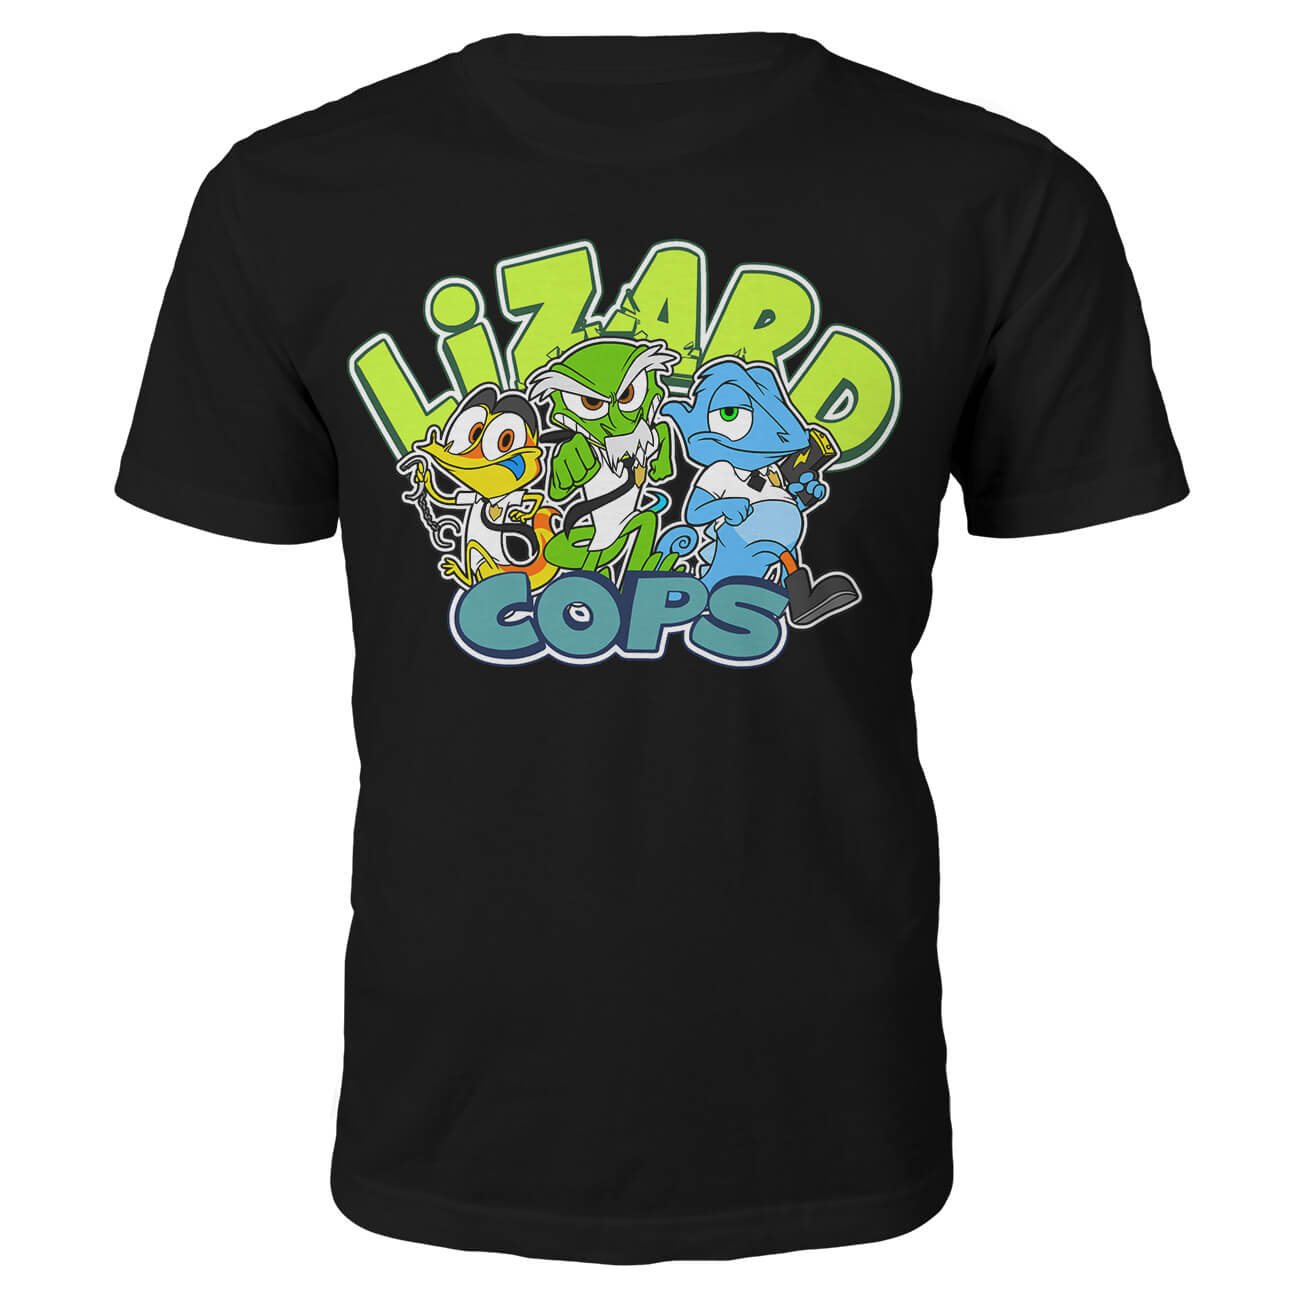 Click to view product details and reviews for Lizard Cops T Shirt Kids L 9 11 Years Black.